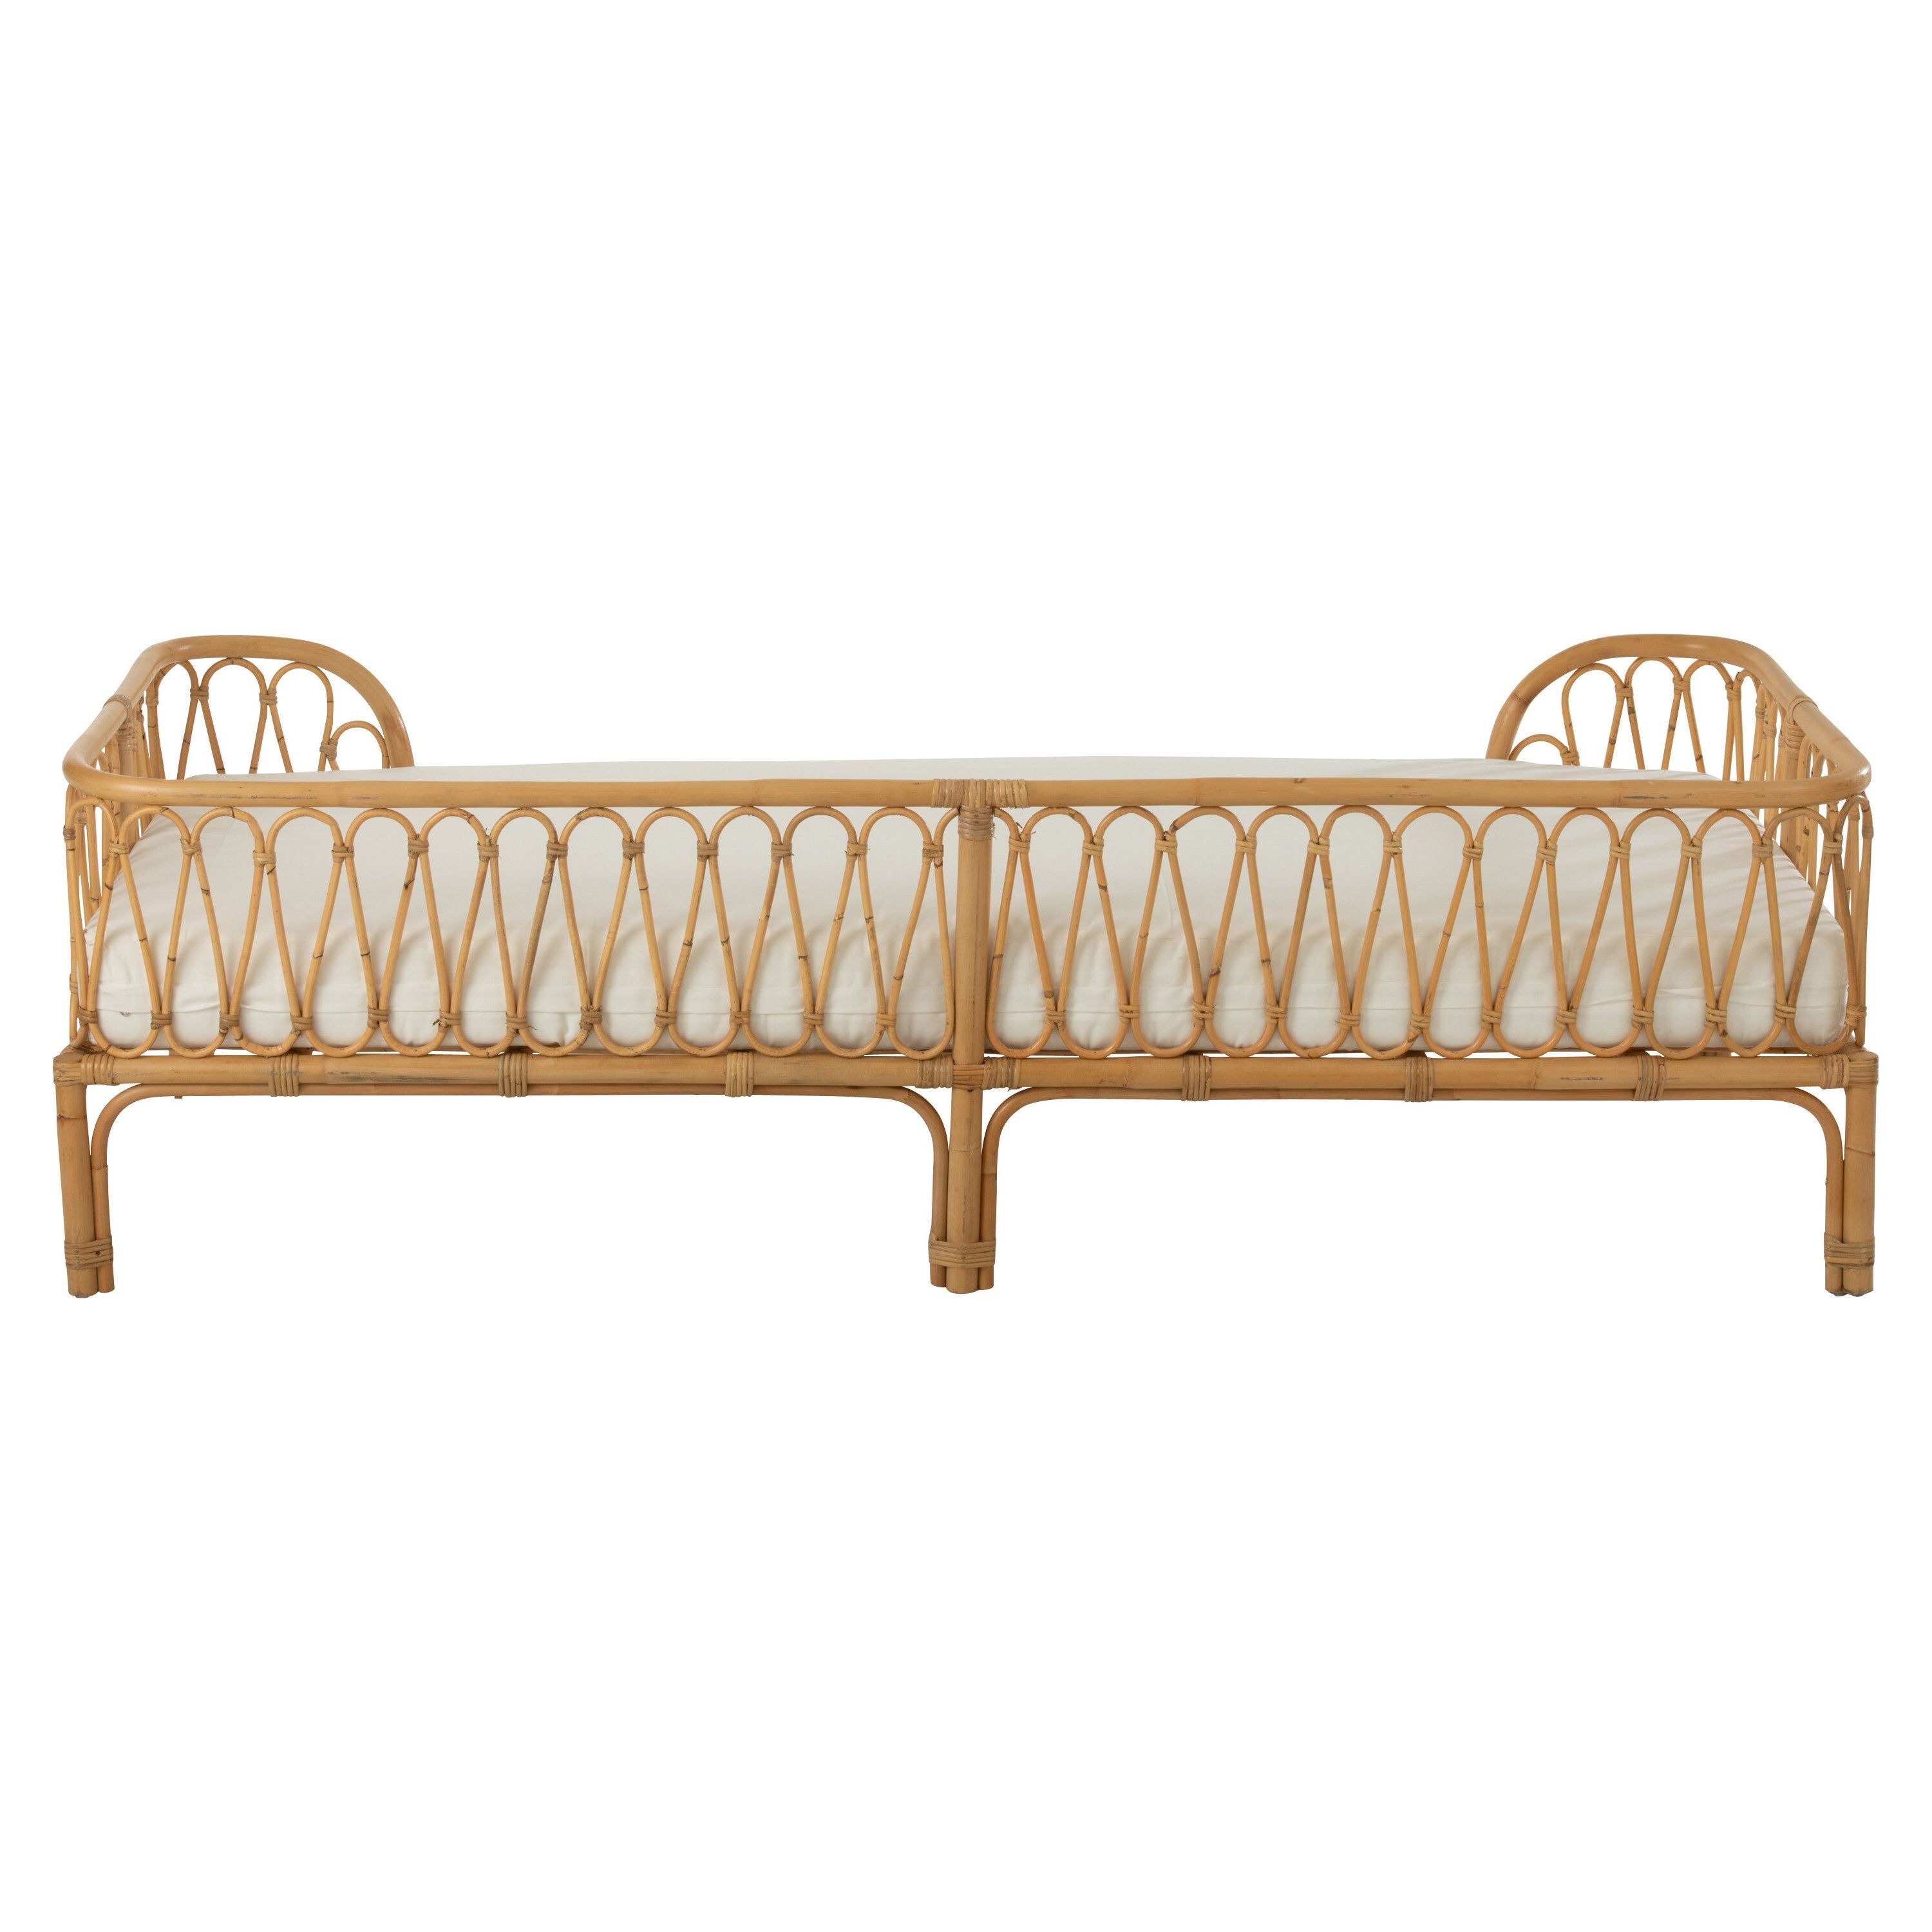 Bed Pierre Rattan Natural